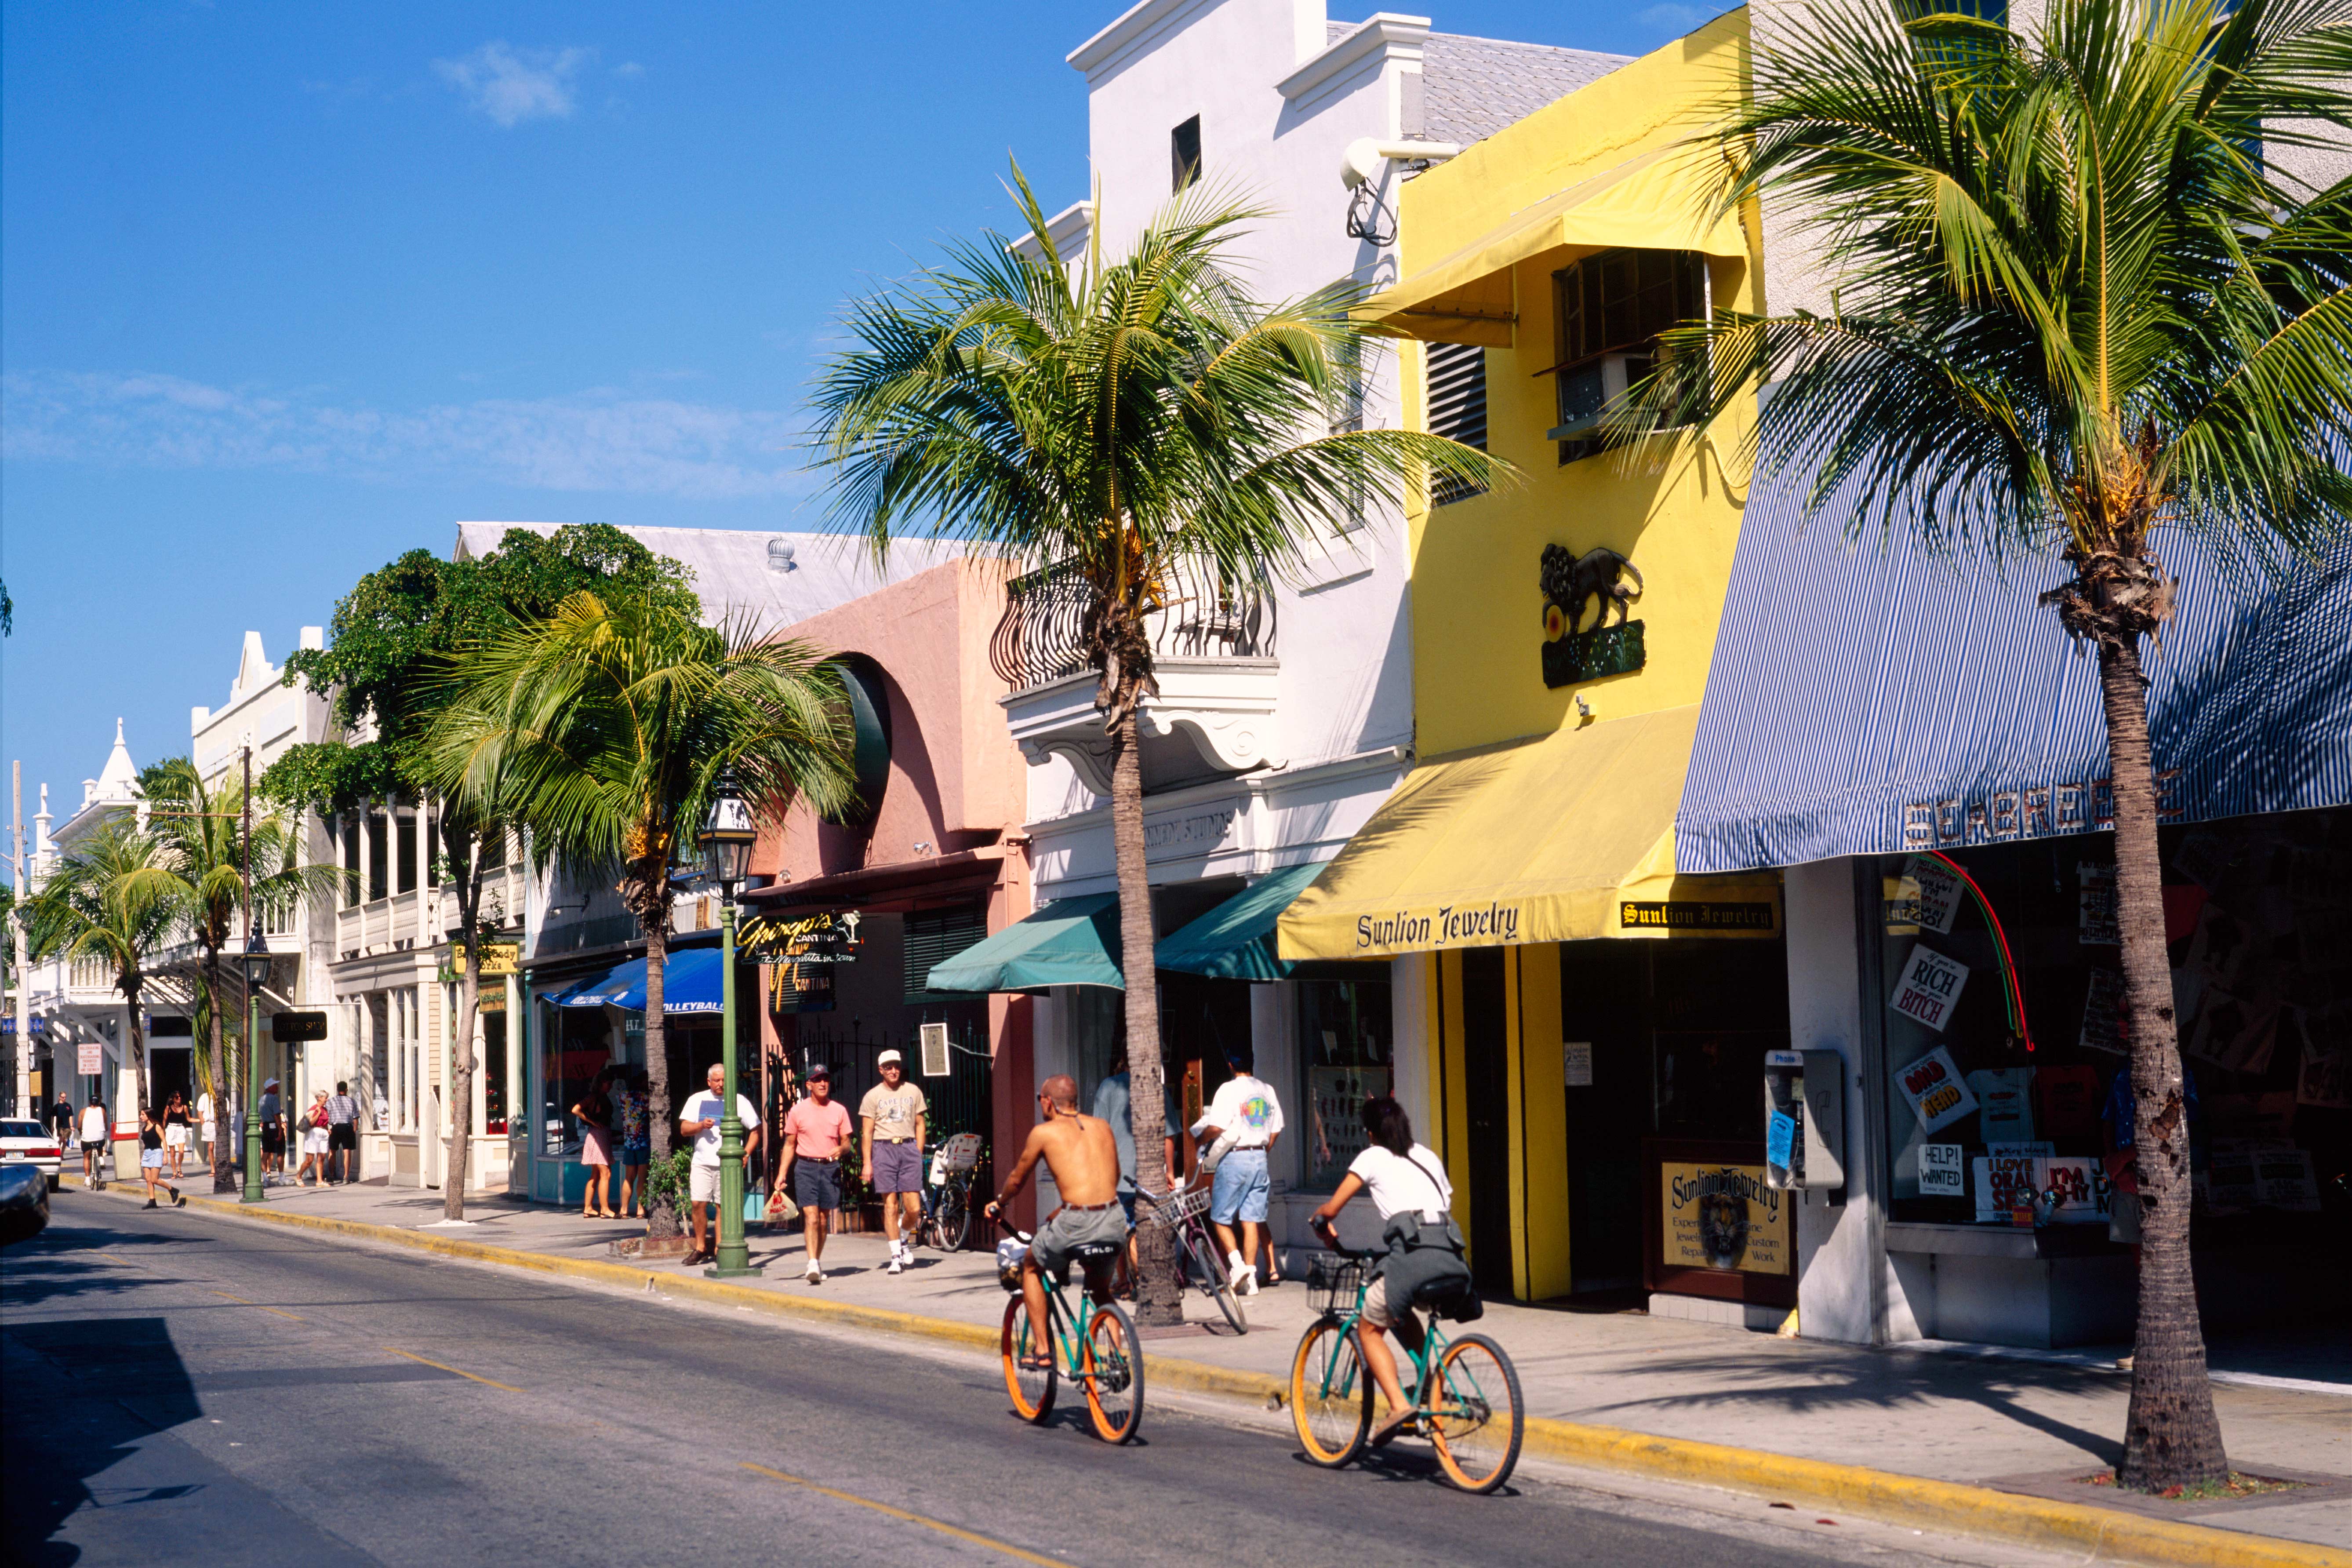 Pastel-colored buildings on Duval Street in Key West, Florida. Image by John Miller / Robert Harding World Imagery / Getty